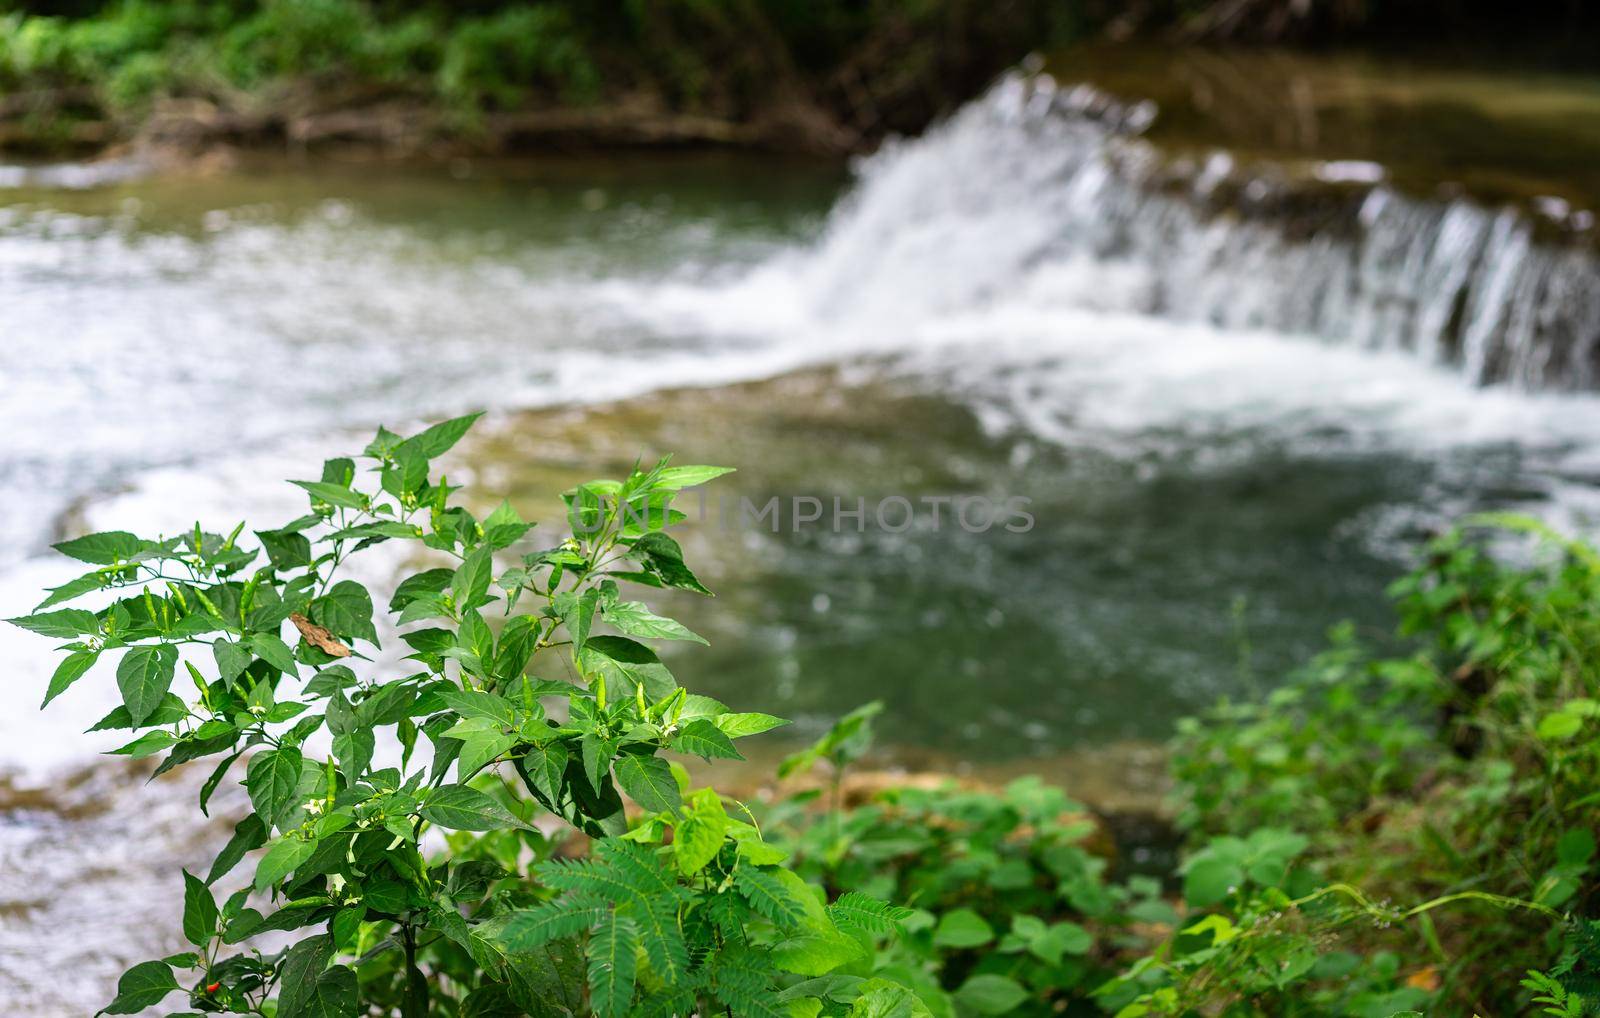 Green chili peppers on the tree with waterfall background by domonite